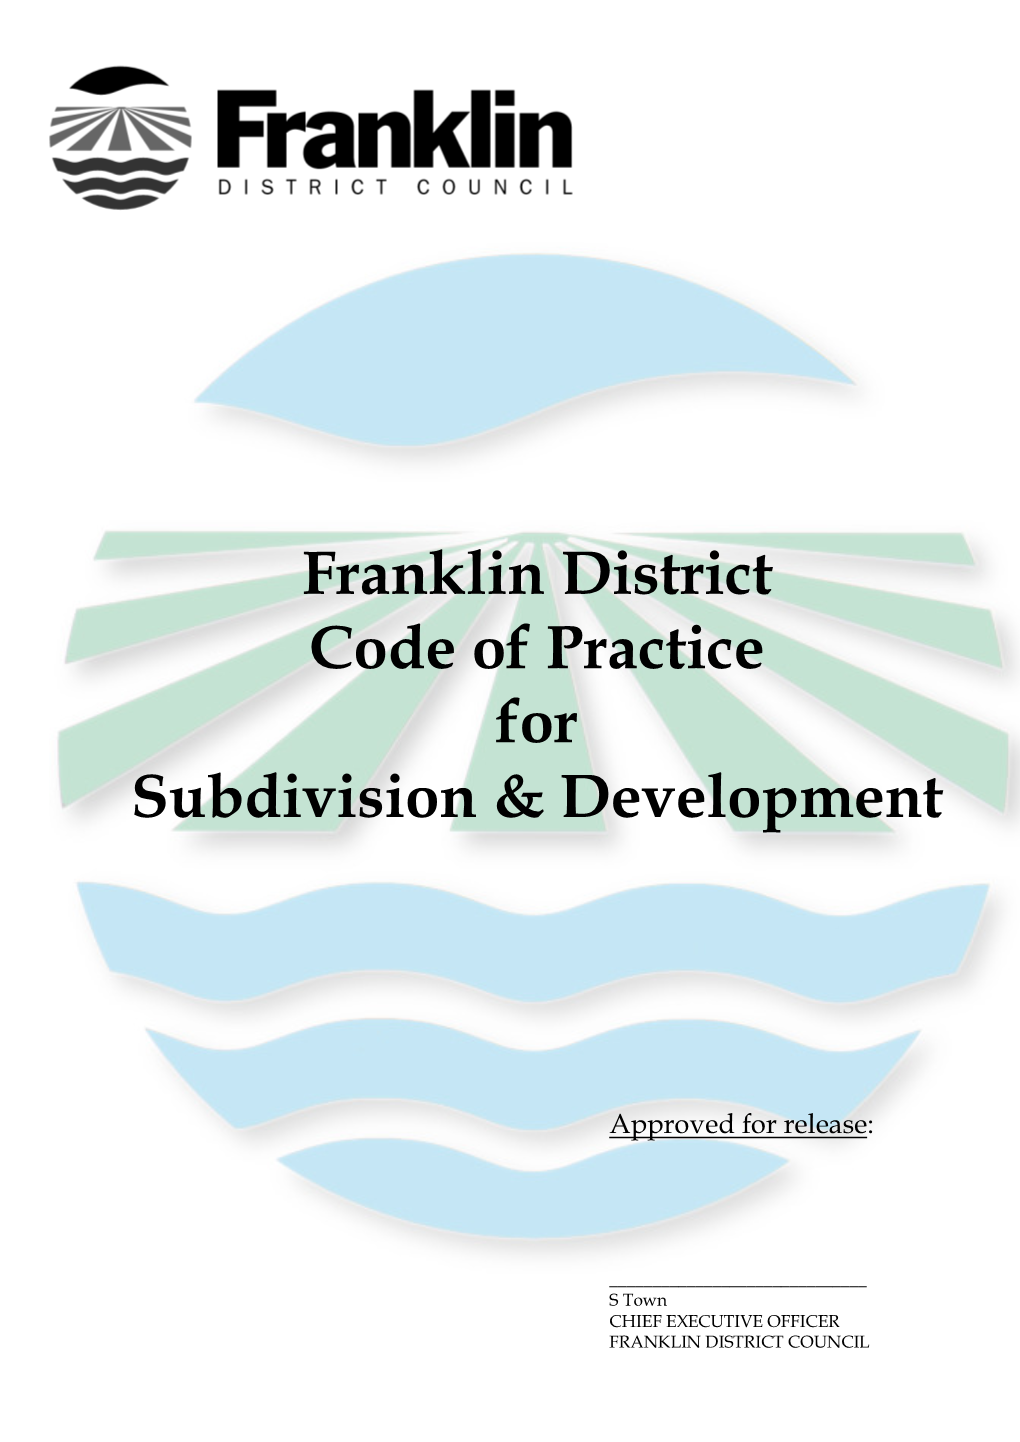 Franklin District Code of Practice for Subdivision & Development